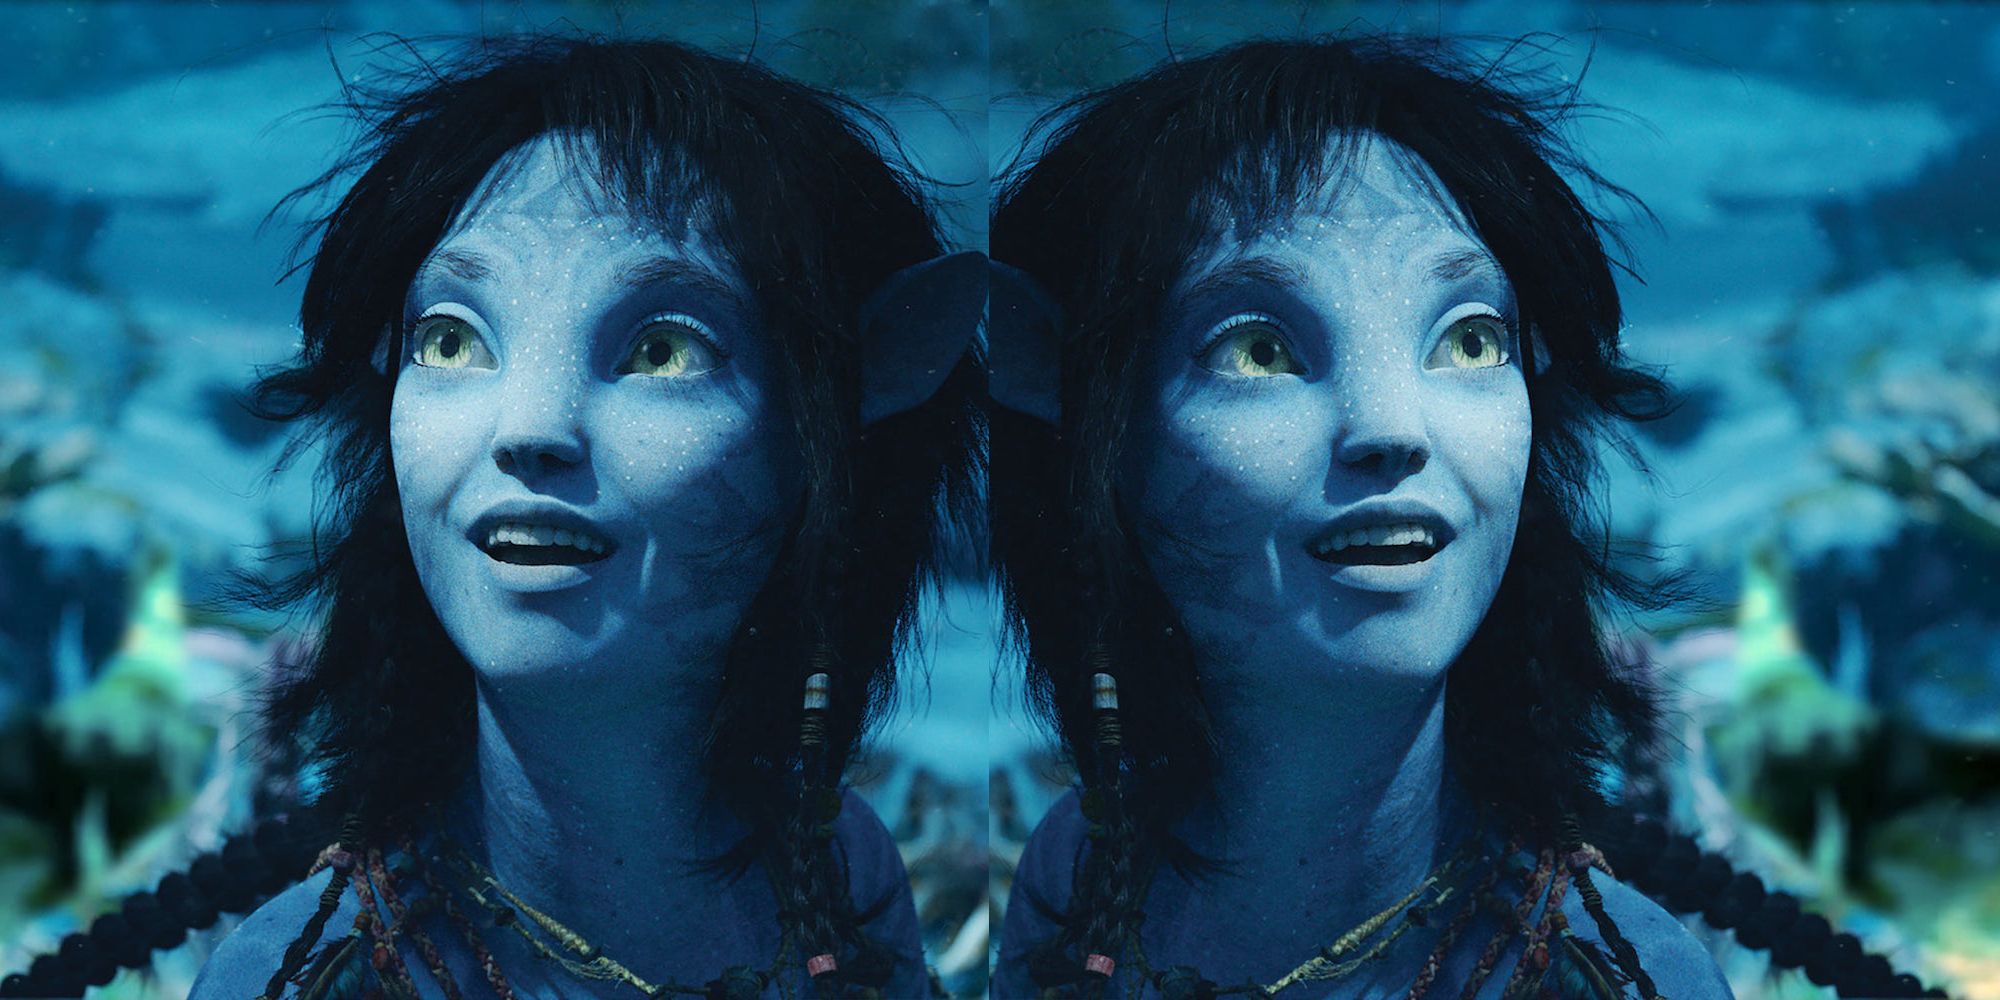 Avatar 2’s Theatrical Requirements Called for 1,000 Different Versions